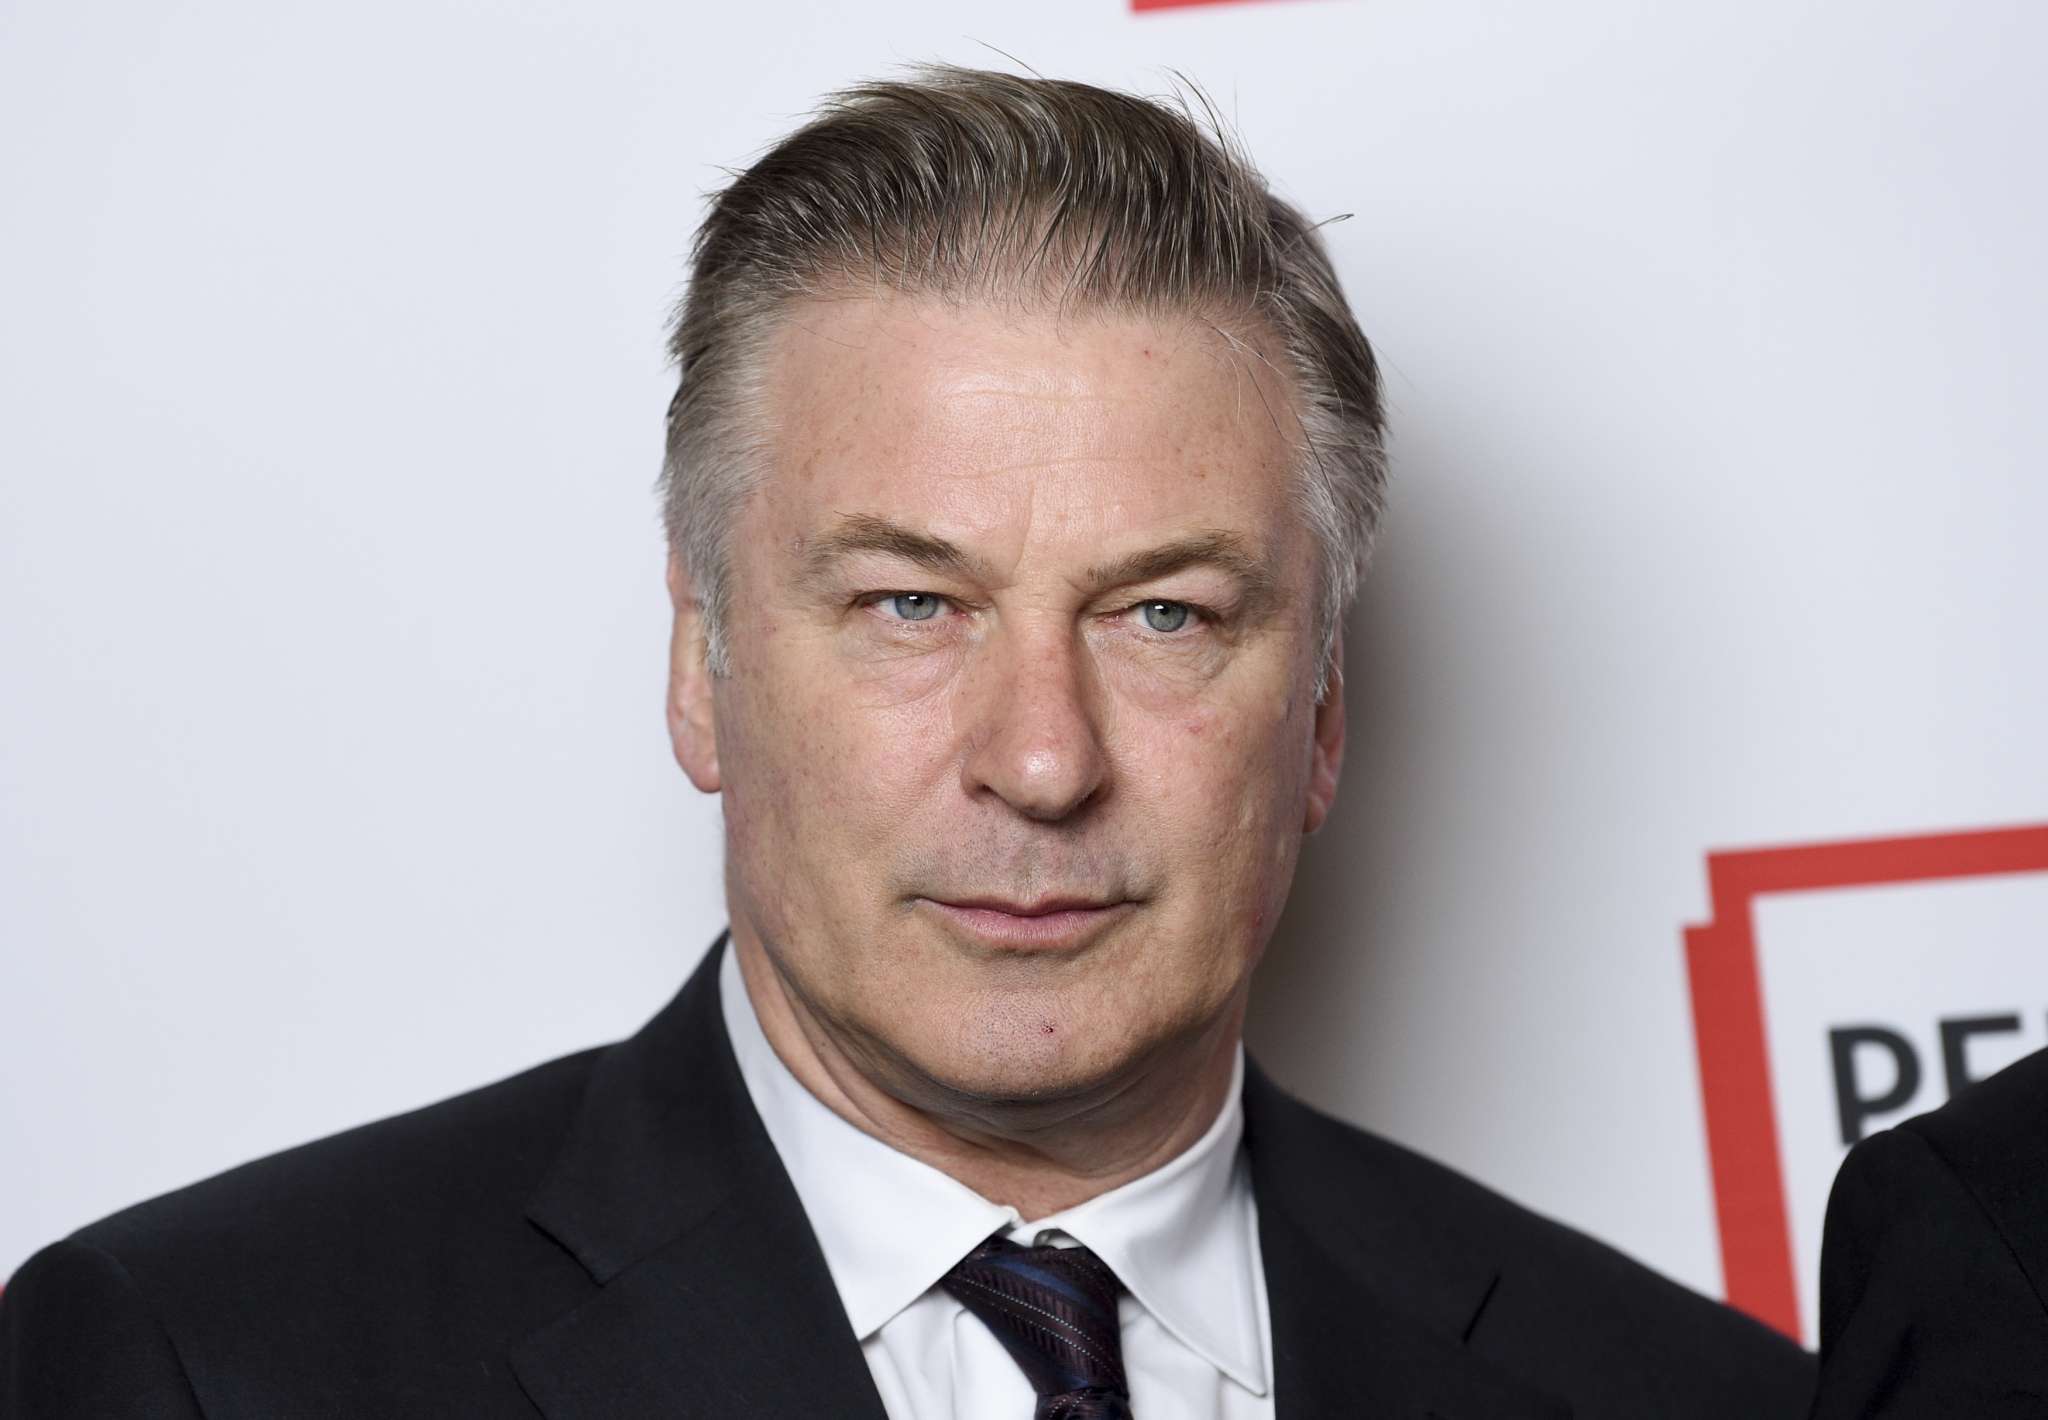 alec-baldwin-breaks-peoples-hearts-with-this-interview-following-the-tragedy-hes-been-involved-in